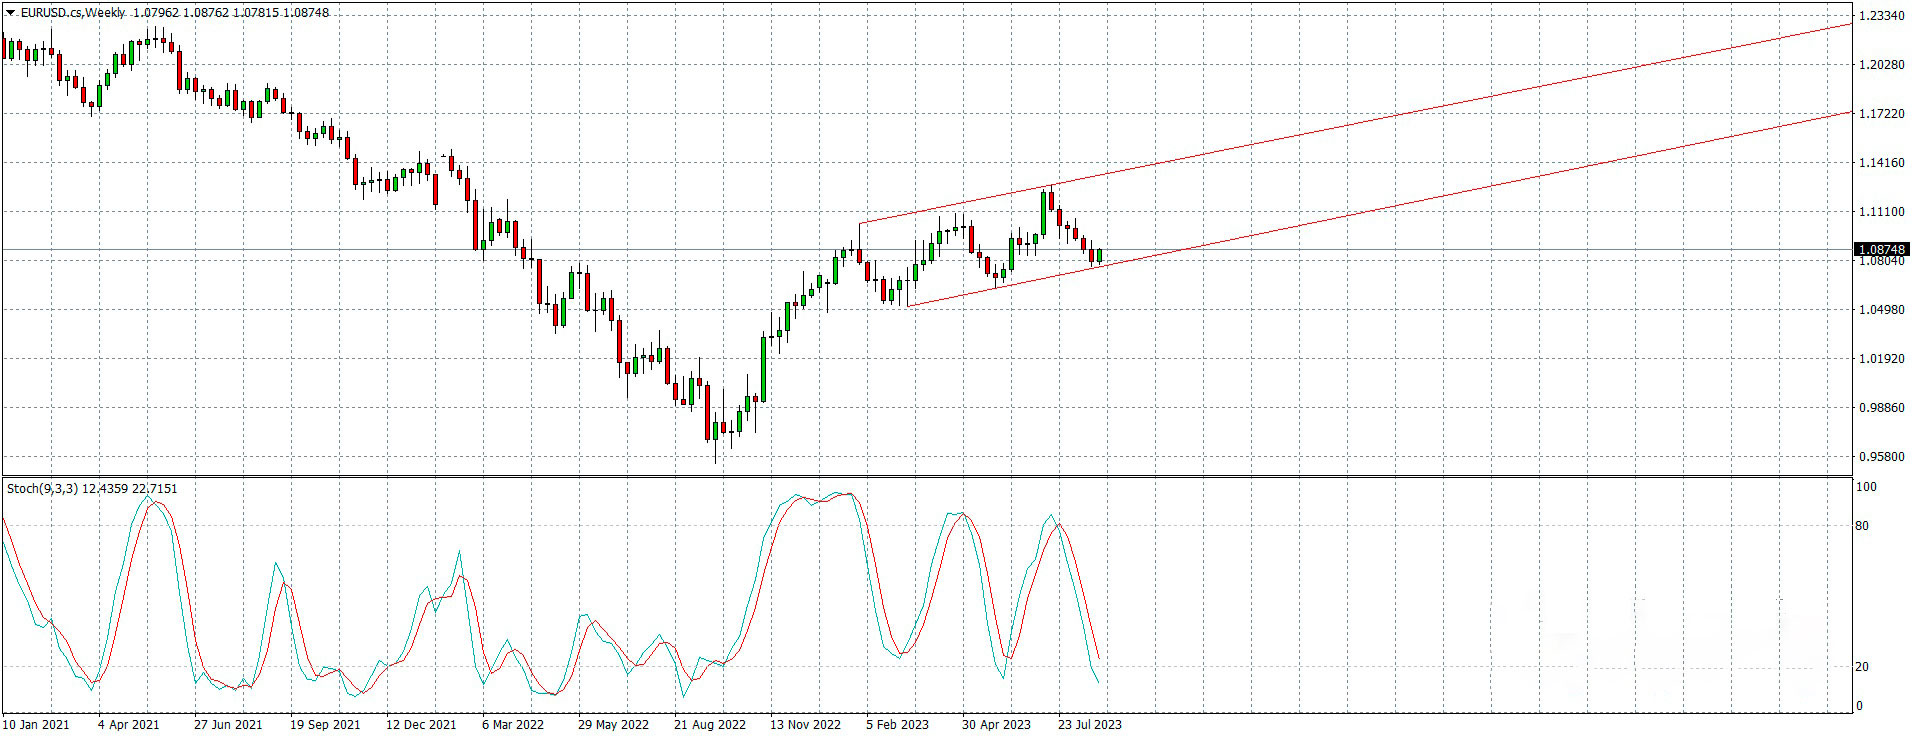 The EURUSD currency pair quotes have approached the lower boundary of the ascending price channel